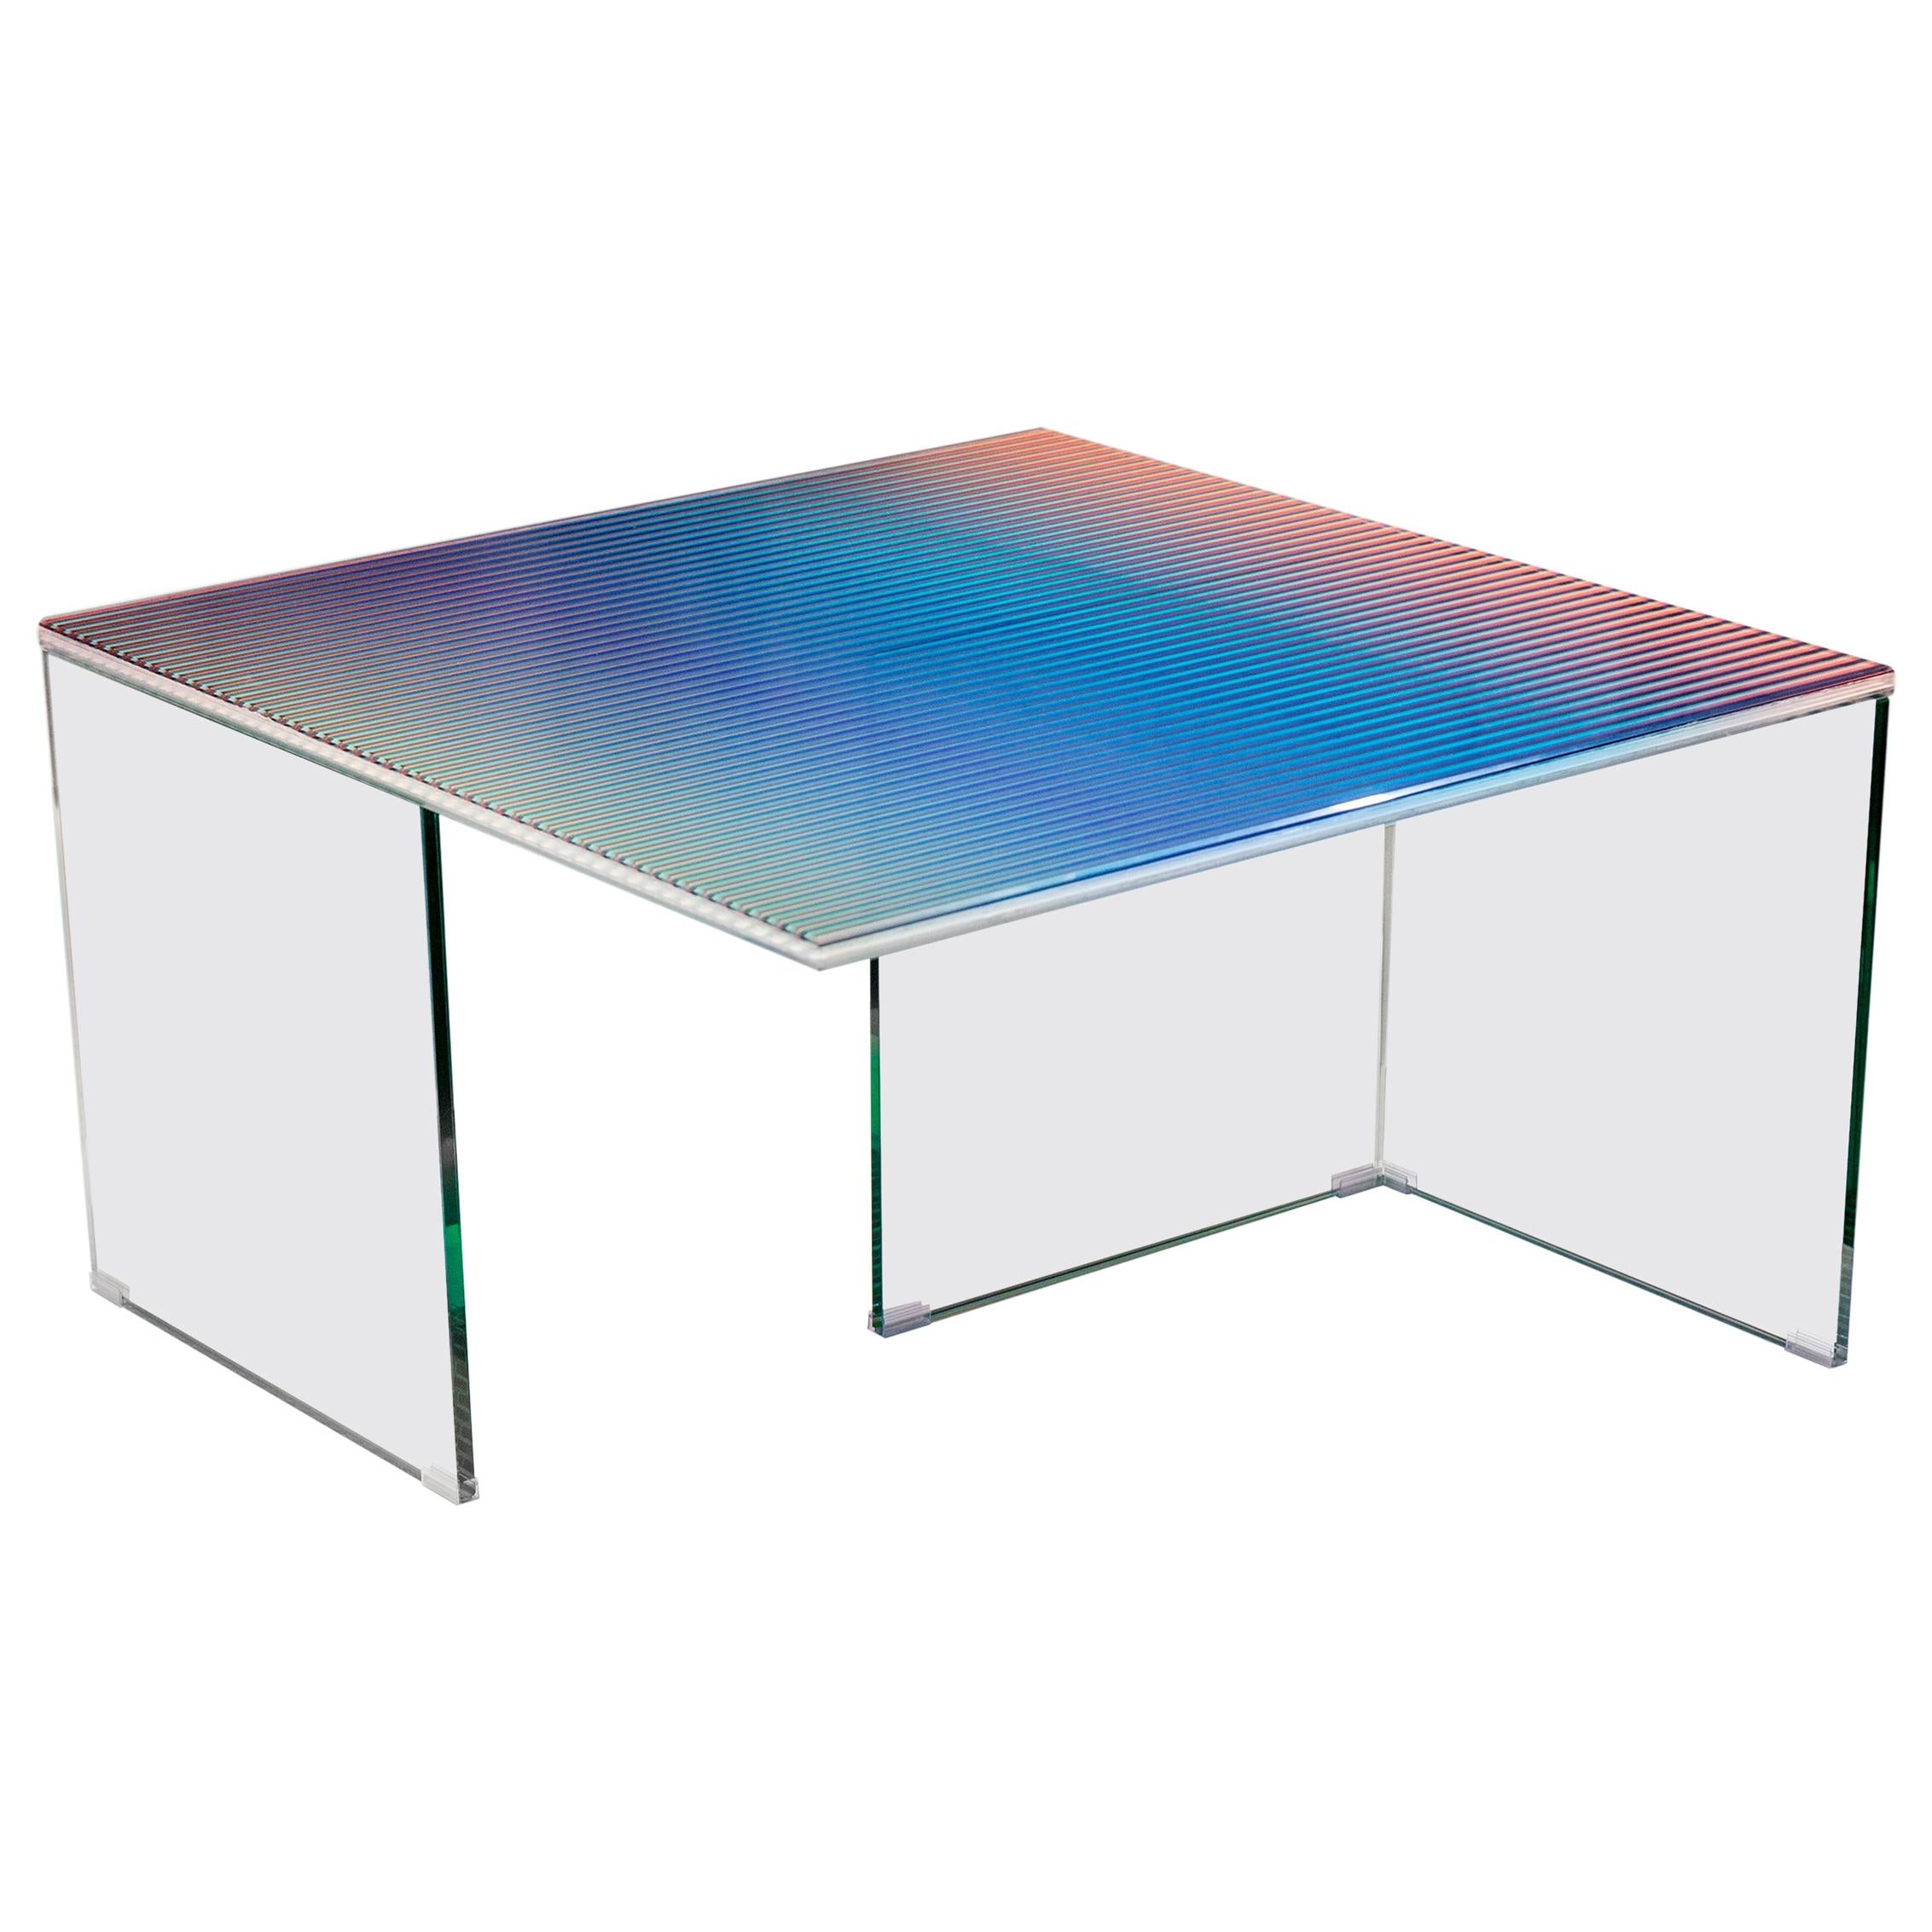 Trichroic Table Made with Three Layers of Glass with a Layer of Colored Bands For Sale